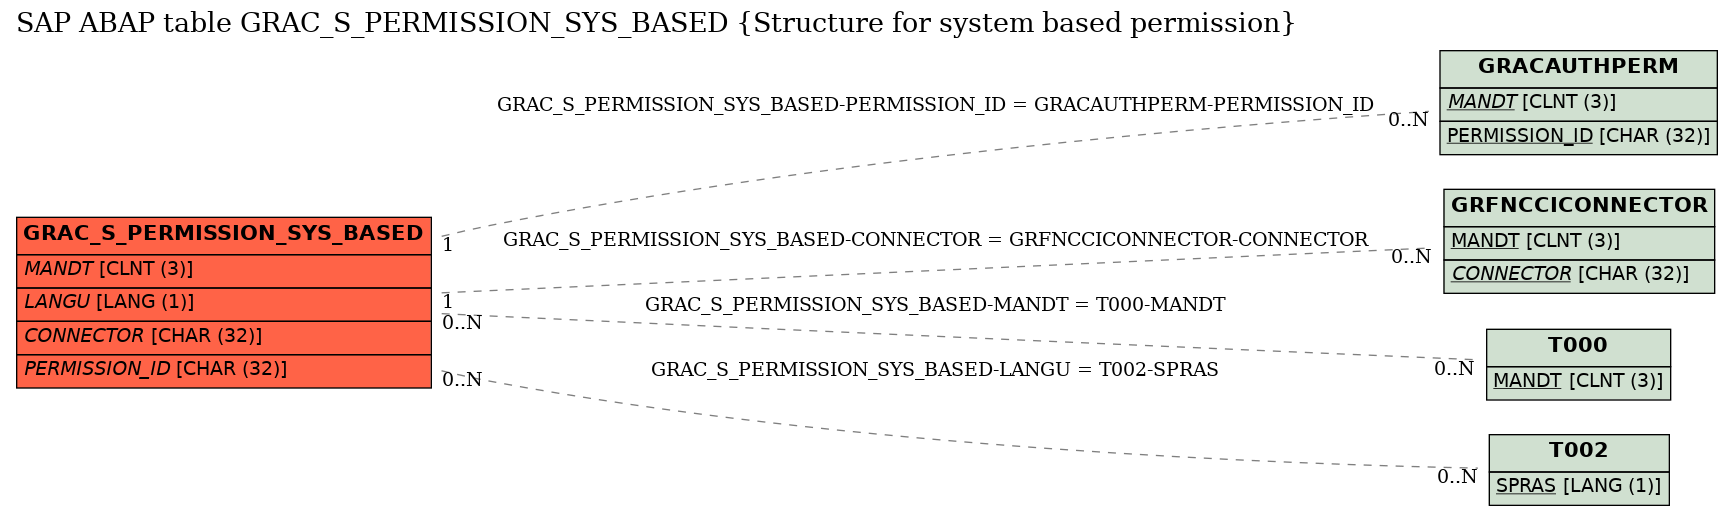 E-R Diagram for table GRAC_S_PERMISSION_SYS_BASED (Structure for system based permission)